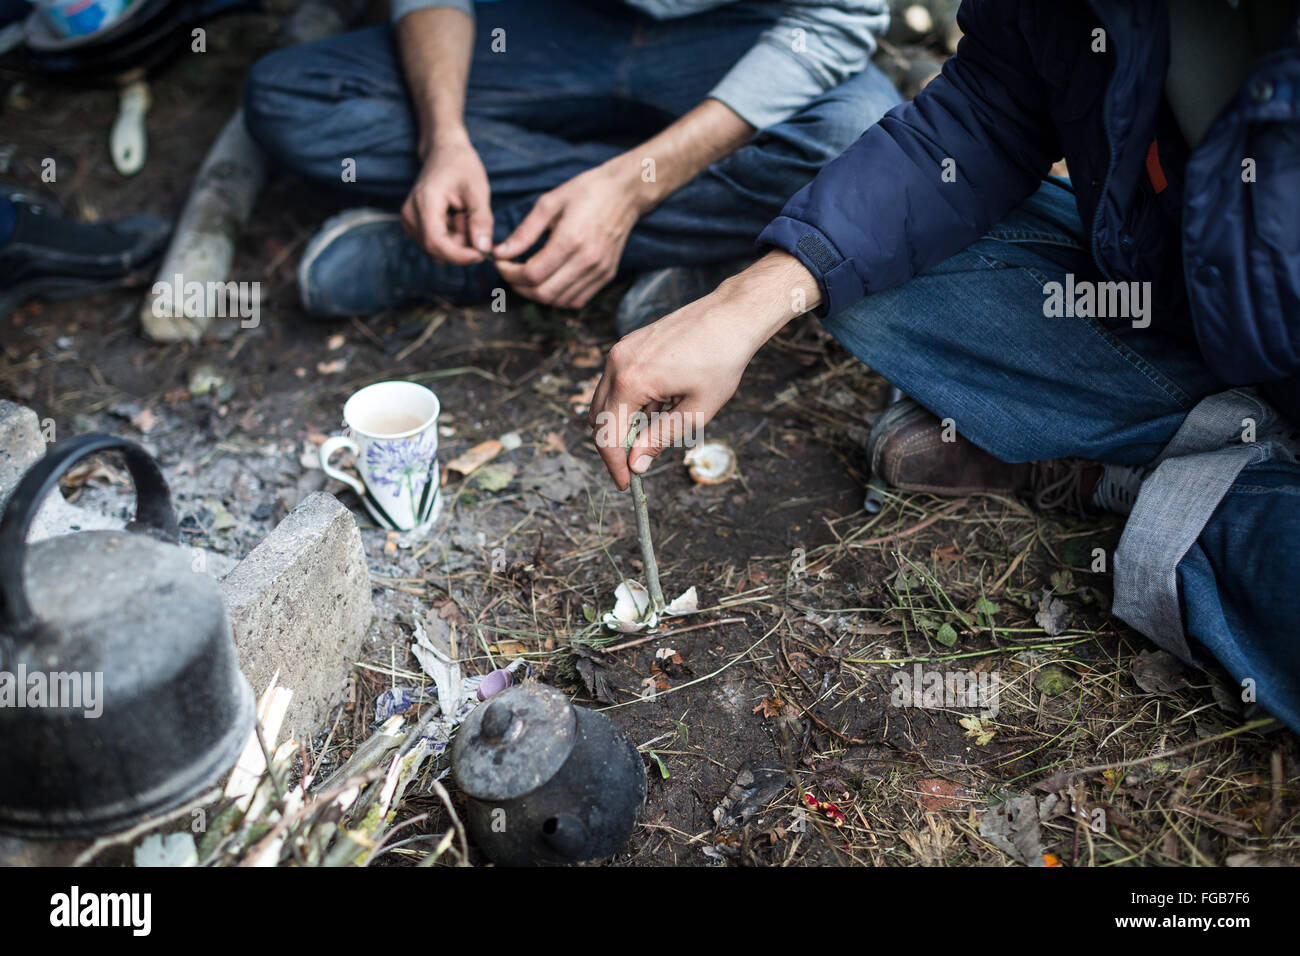 The hands of Kurdish refugees as they boil water in a kettle over a fire by their tent in the jungle refugee camp, Calais. Stock Photo